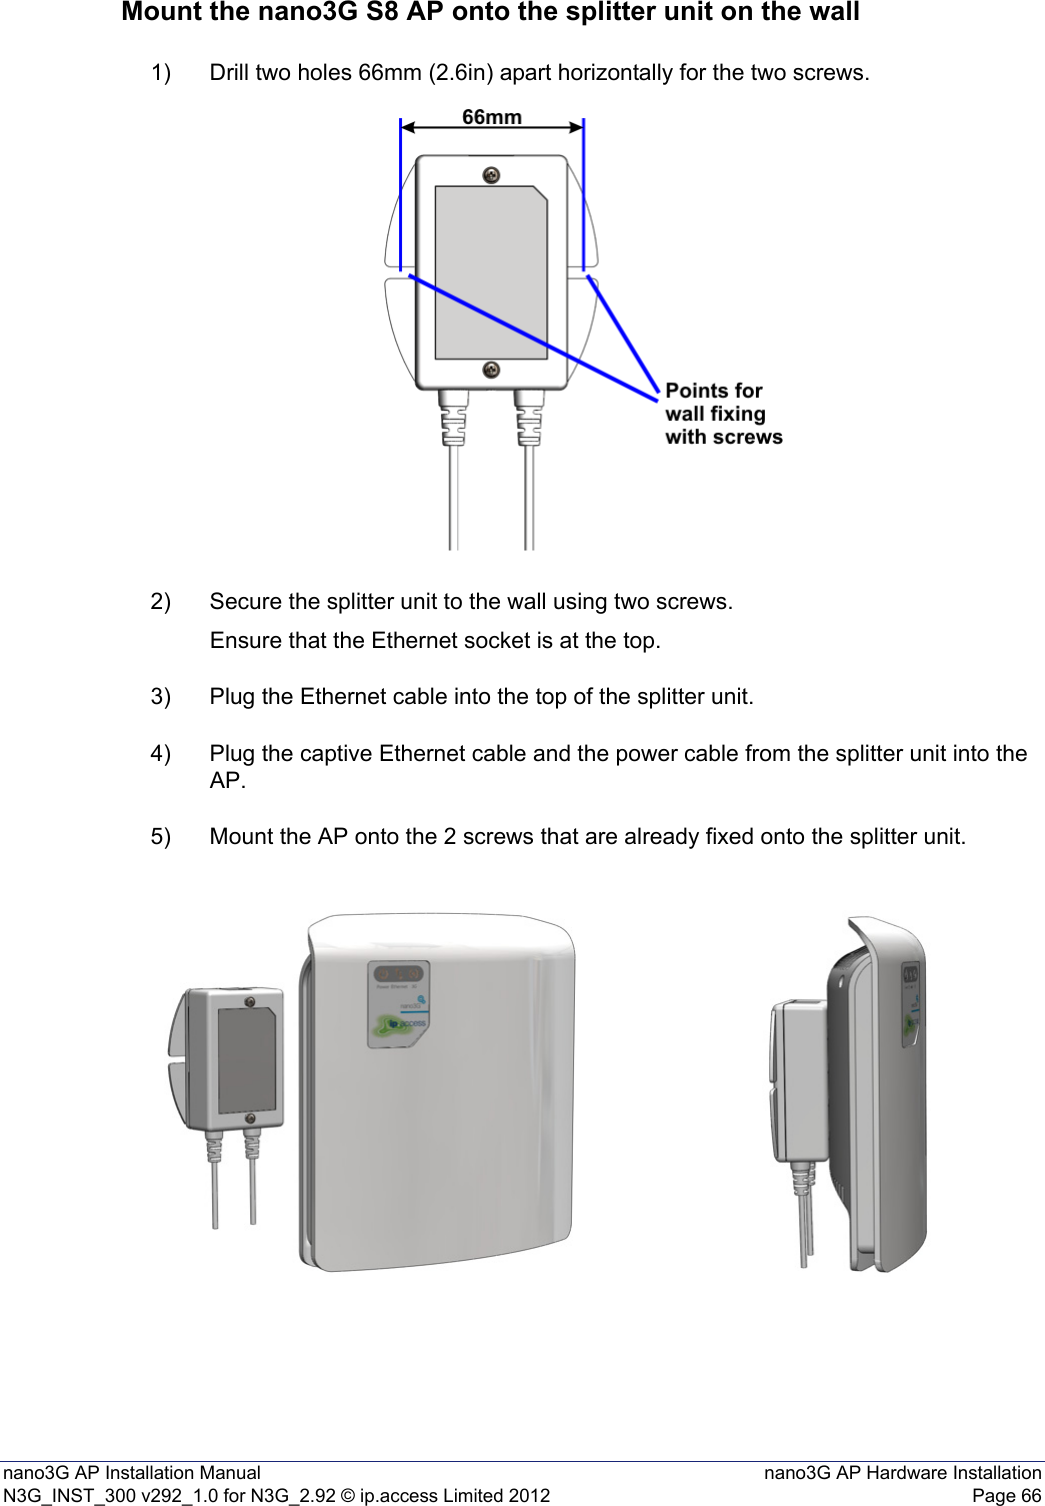 nano3G AP Installation Manual nano3G AP Hardware InstallationN3G_INST_300 v292_1.0 for N3G_2.92 © ip.access Limited 2012 Page 66Mount the nano3G S8 AP onto the splitter unit on the wall1) Drill two holes 66mm (2.6in) apart horizontally for the two screws.2) Secure the splitter unit to the wall using two screws.Ensure that the Ethernet socket is at the top.3) Plug the Ethernet cable into the top of the splitter unit.4) Plug the captive Ethernet cable and the power cable from the splitter unit into the AP.5) Mount the AP onto the 2 screws that are already fixed onto the splitter unit.